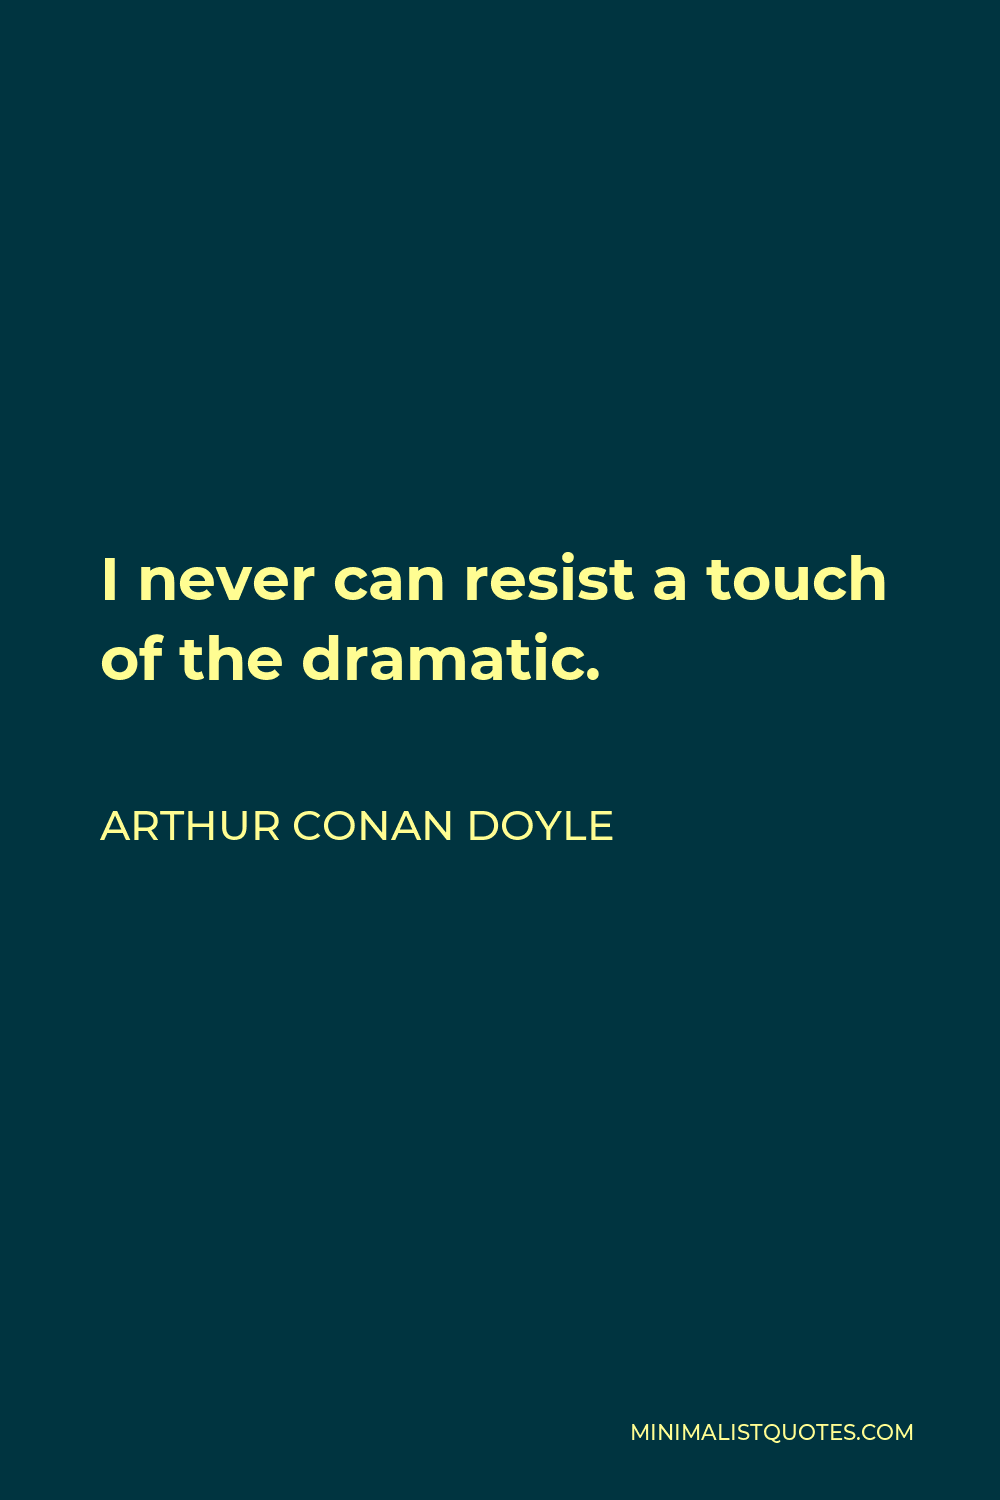 Arthur Conan Doyle Quote - I never can resist a touch of the dramatic.